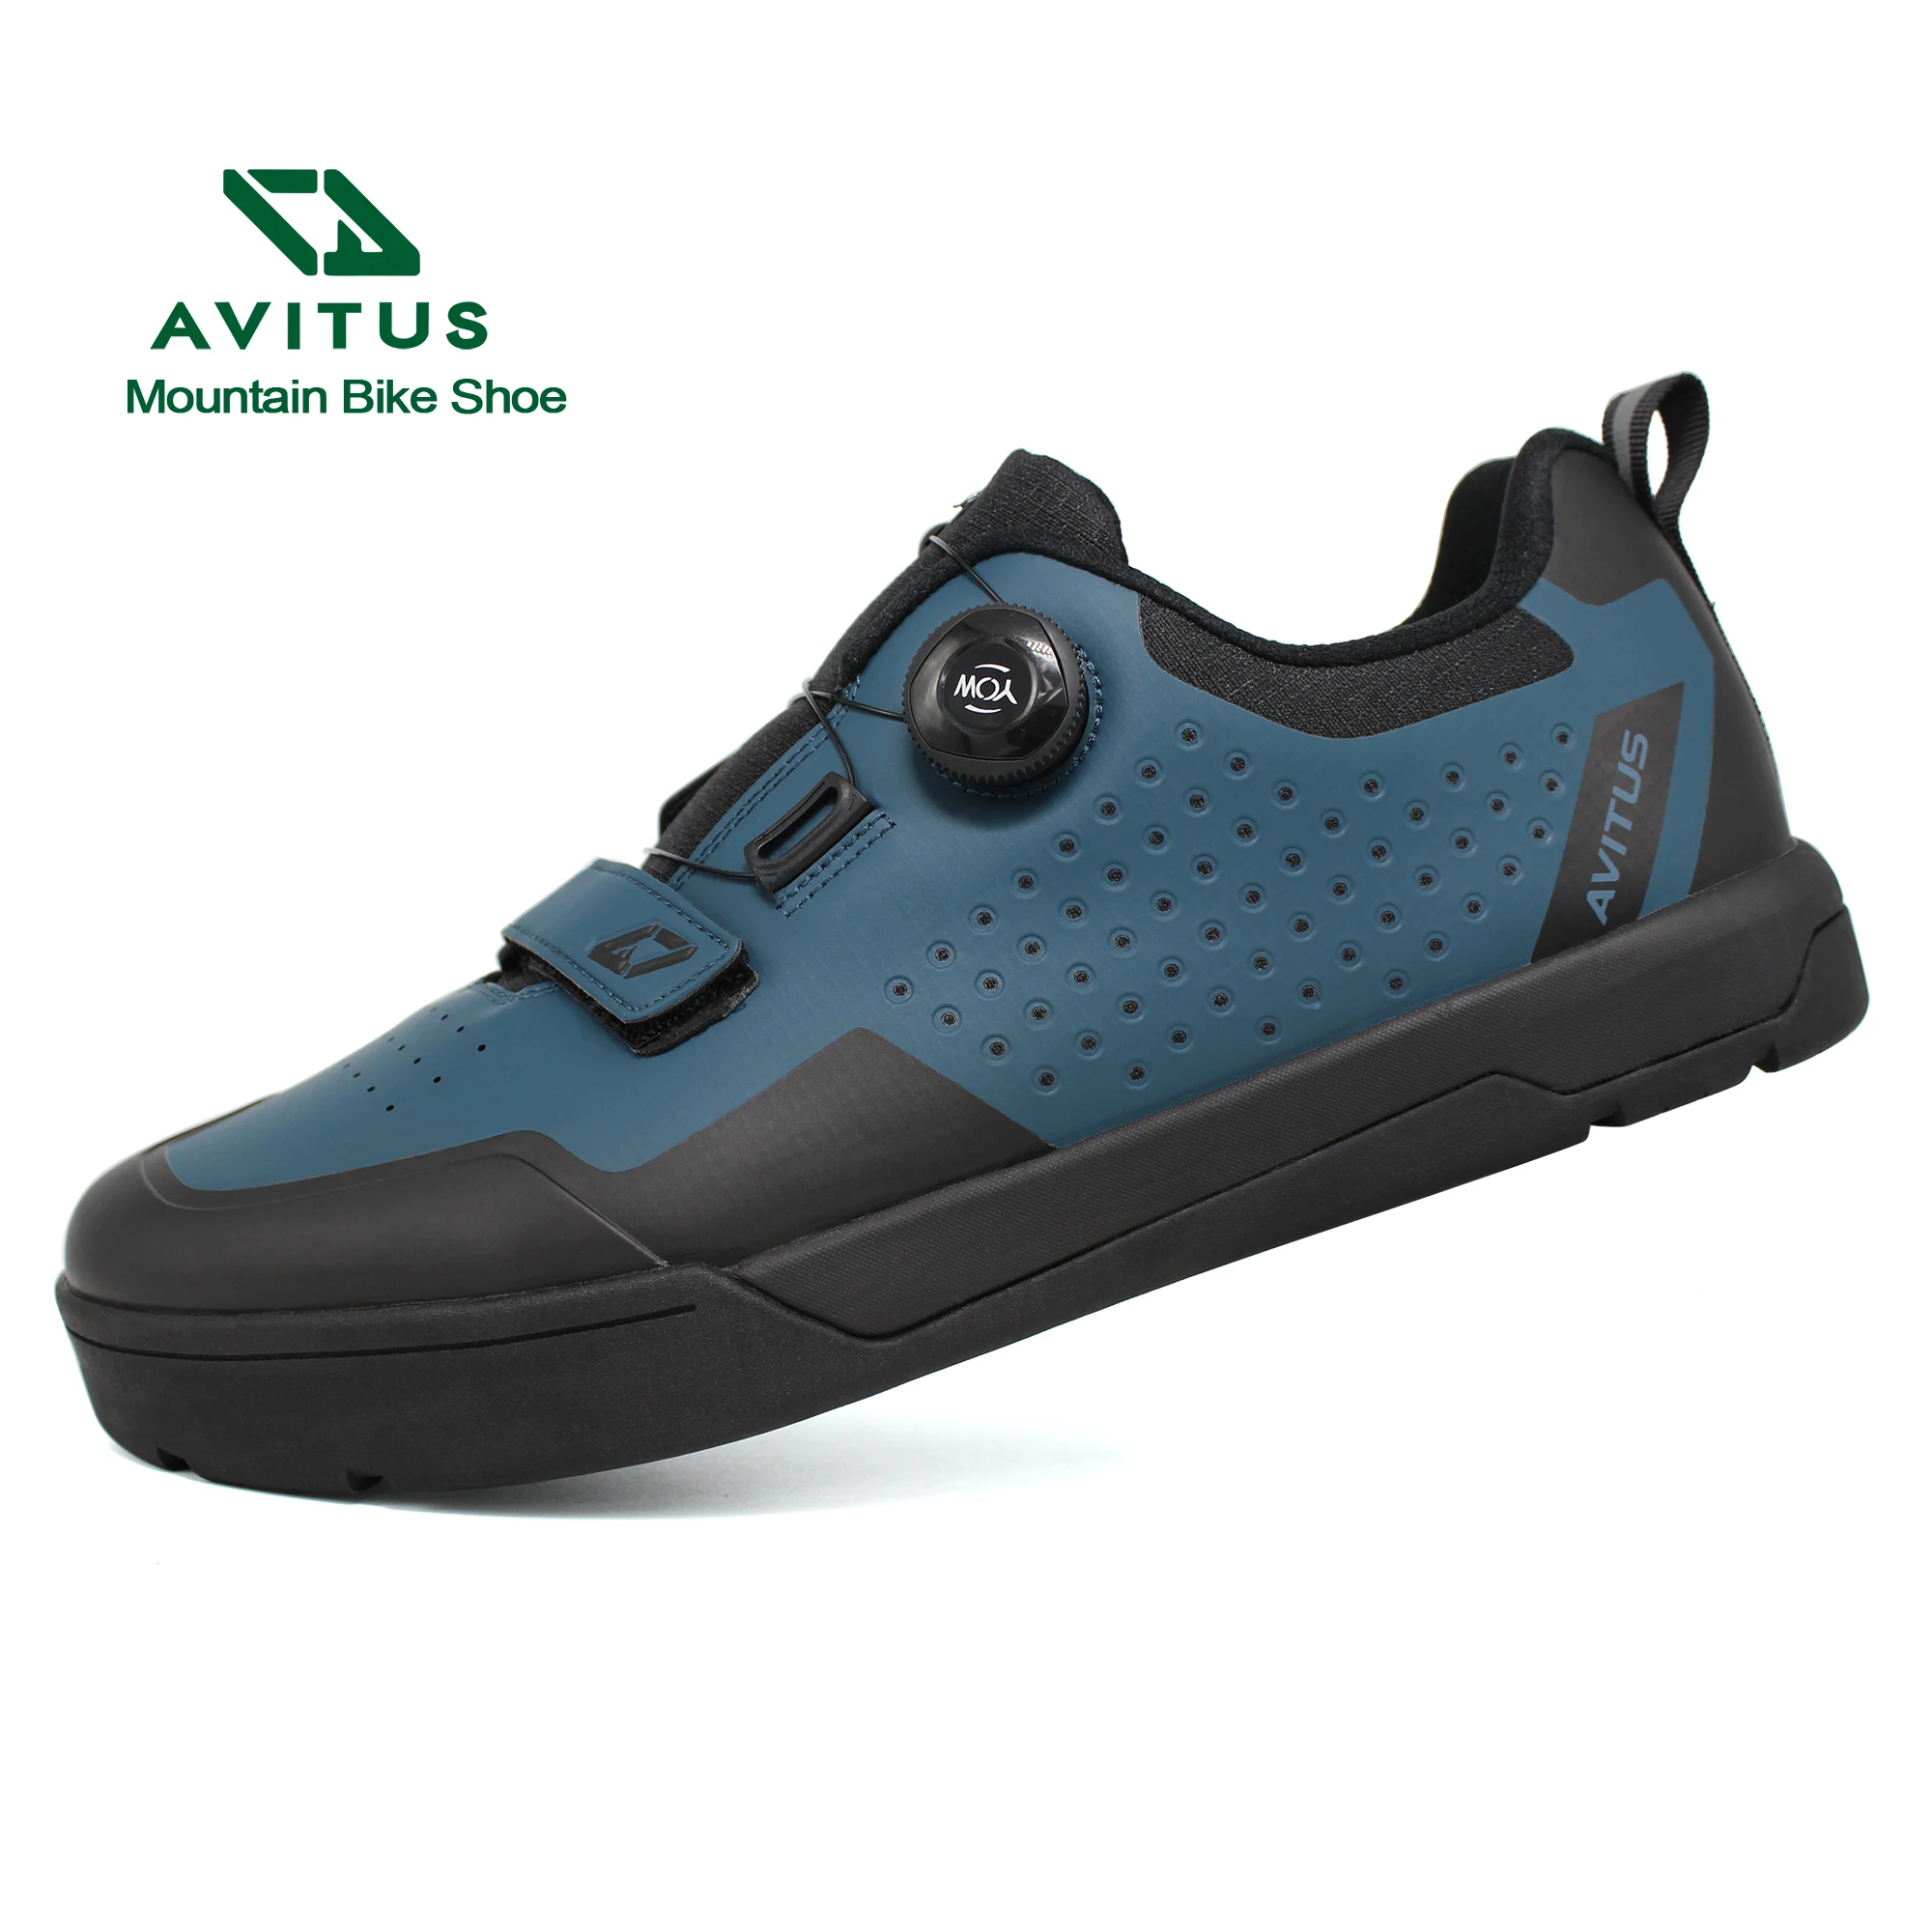 Avitus Mens Mtb Shoes F31 For Flat Pedal Free Ride Commuting Road Downhill Dual Slalom Men Mountain Bike Shoes Buy Cycling Shoes For Road Riding Rotating Shoe Breathable